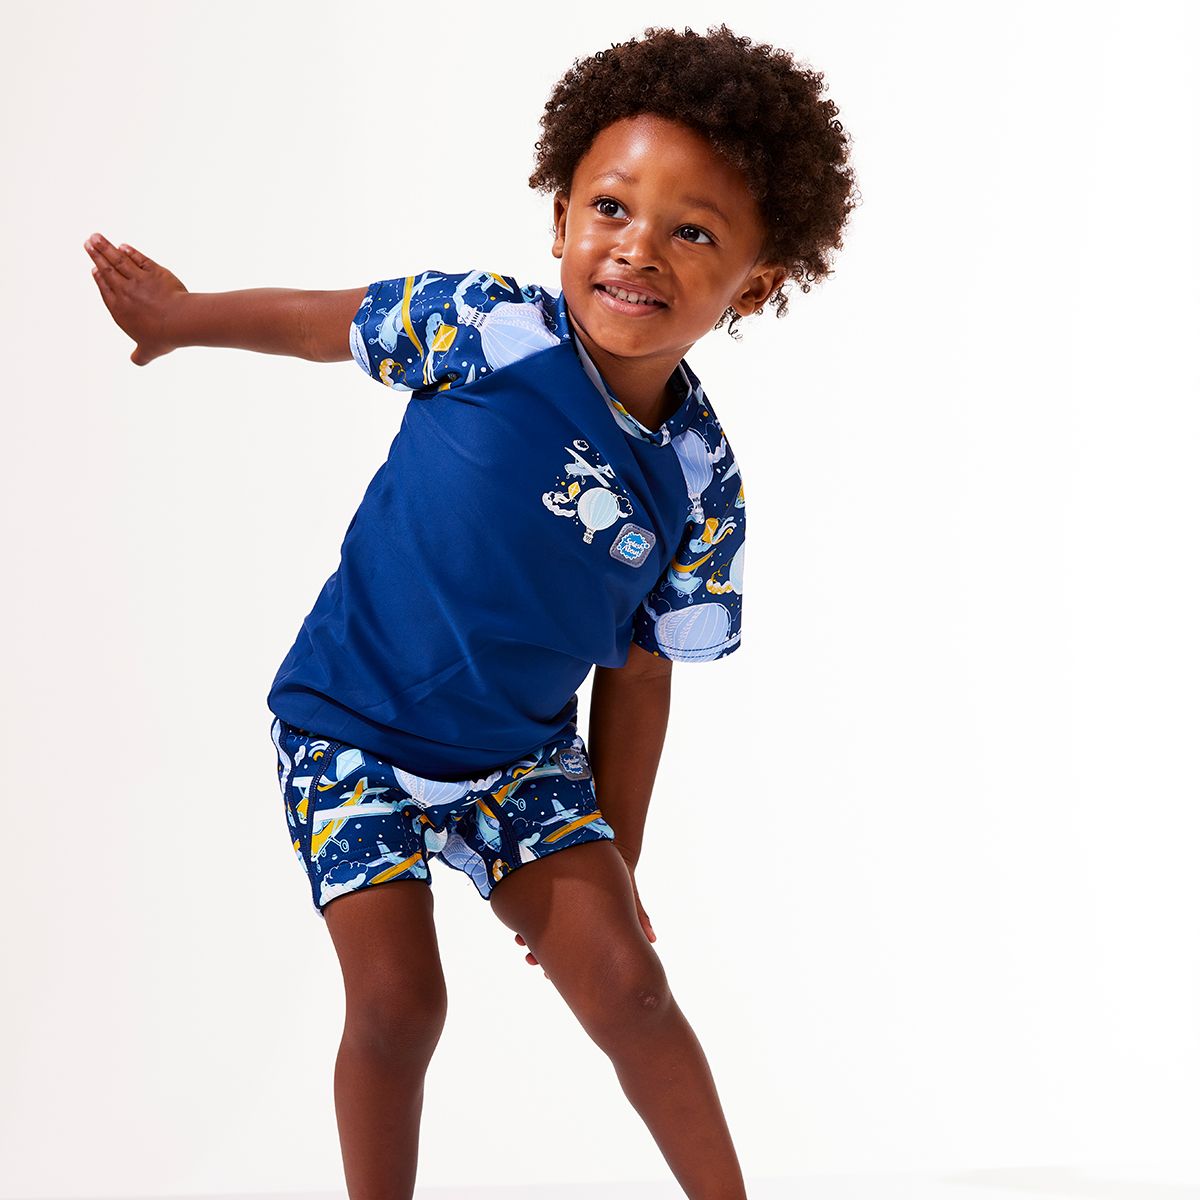 Lifestyle image of toddler wearing UV protective short sleeve rash top in navy blue, and sky themed print on the chest and sleeves. He's also wearing matching swim shorts or jammers.